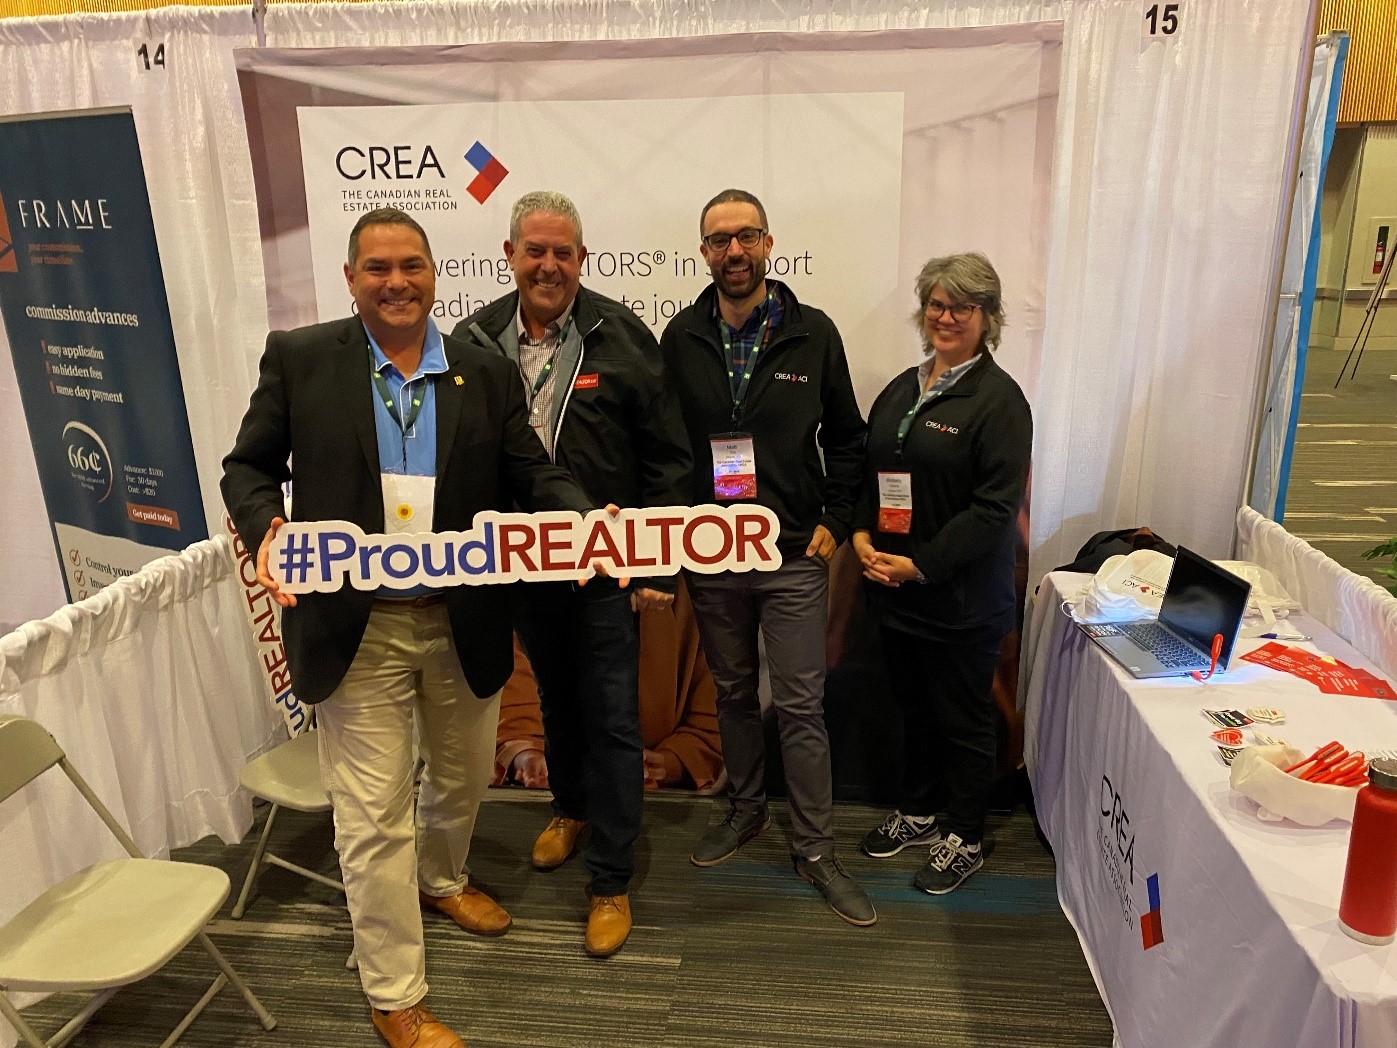 CREA staff and former CREA President Jason Stephen at the Royal LePage National Sales Conference in Winnipeg, Manitoba.